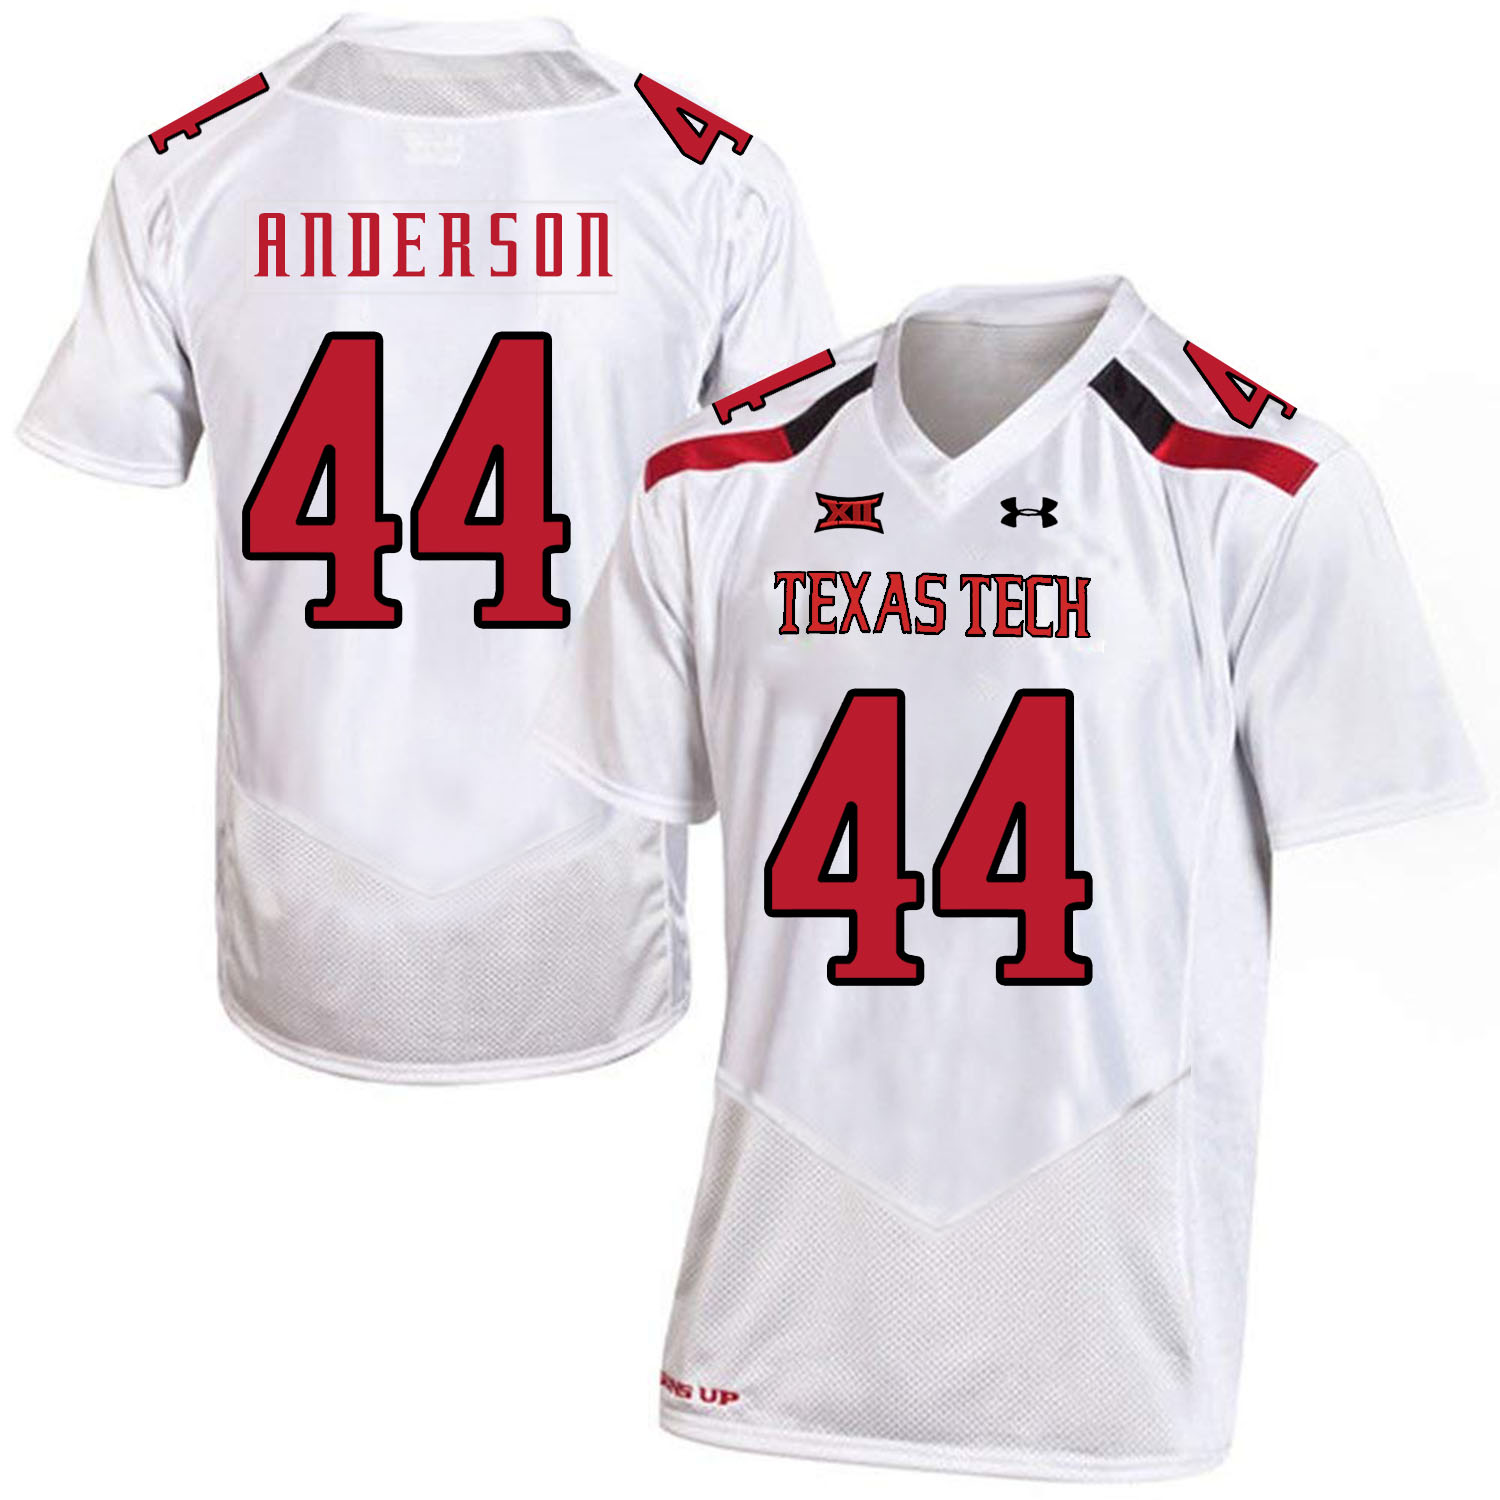 Texas Tech Red Raiders 44 Donny Anderson White College Football Jersey